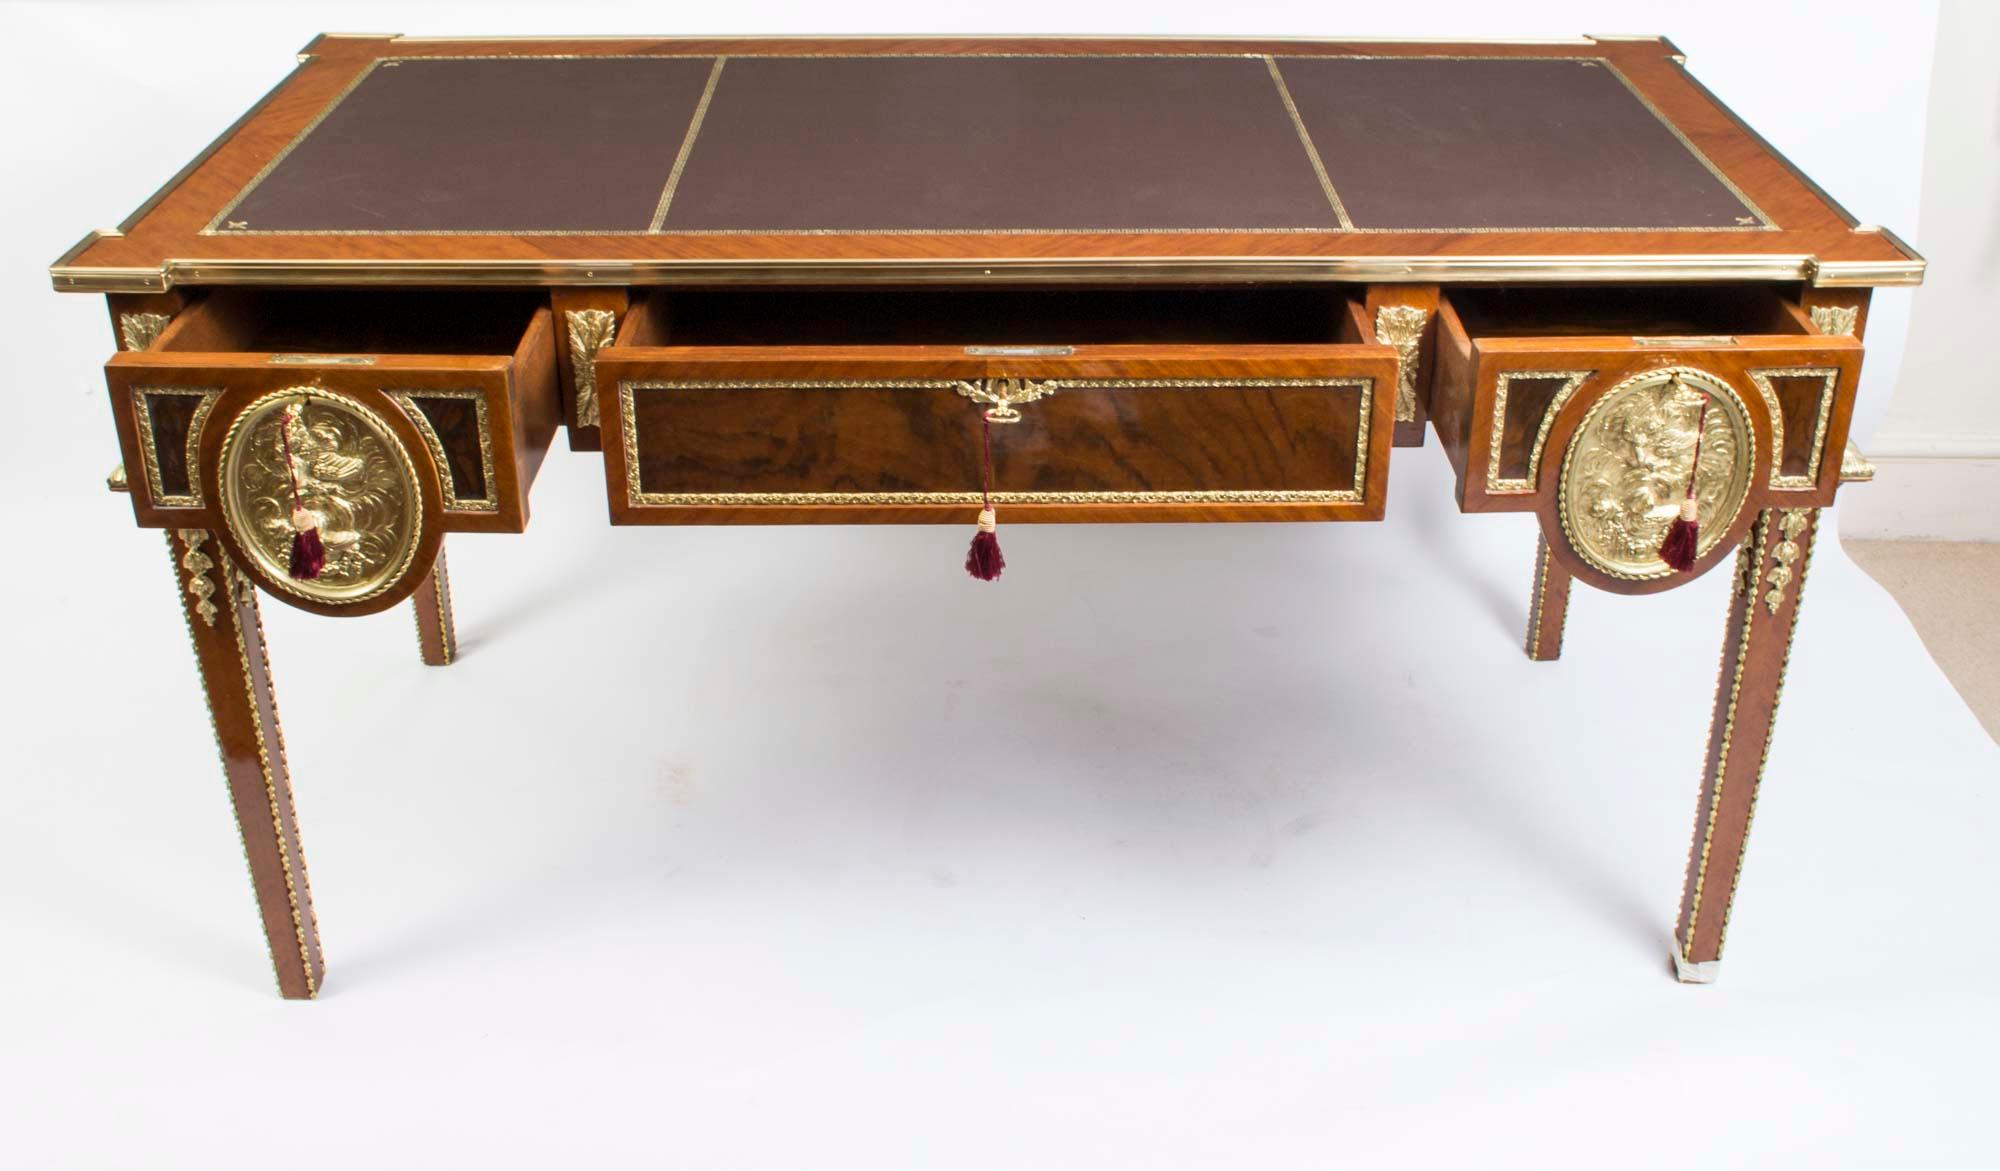 This is a grand Empire Revival Vintage writing table in walnut with beautiful ormolu mounts and tooled leather writing surface, dating from the last quarter of the 20th century.

The table features large ormolu circular ormolu plaques around its